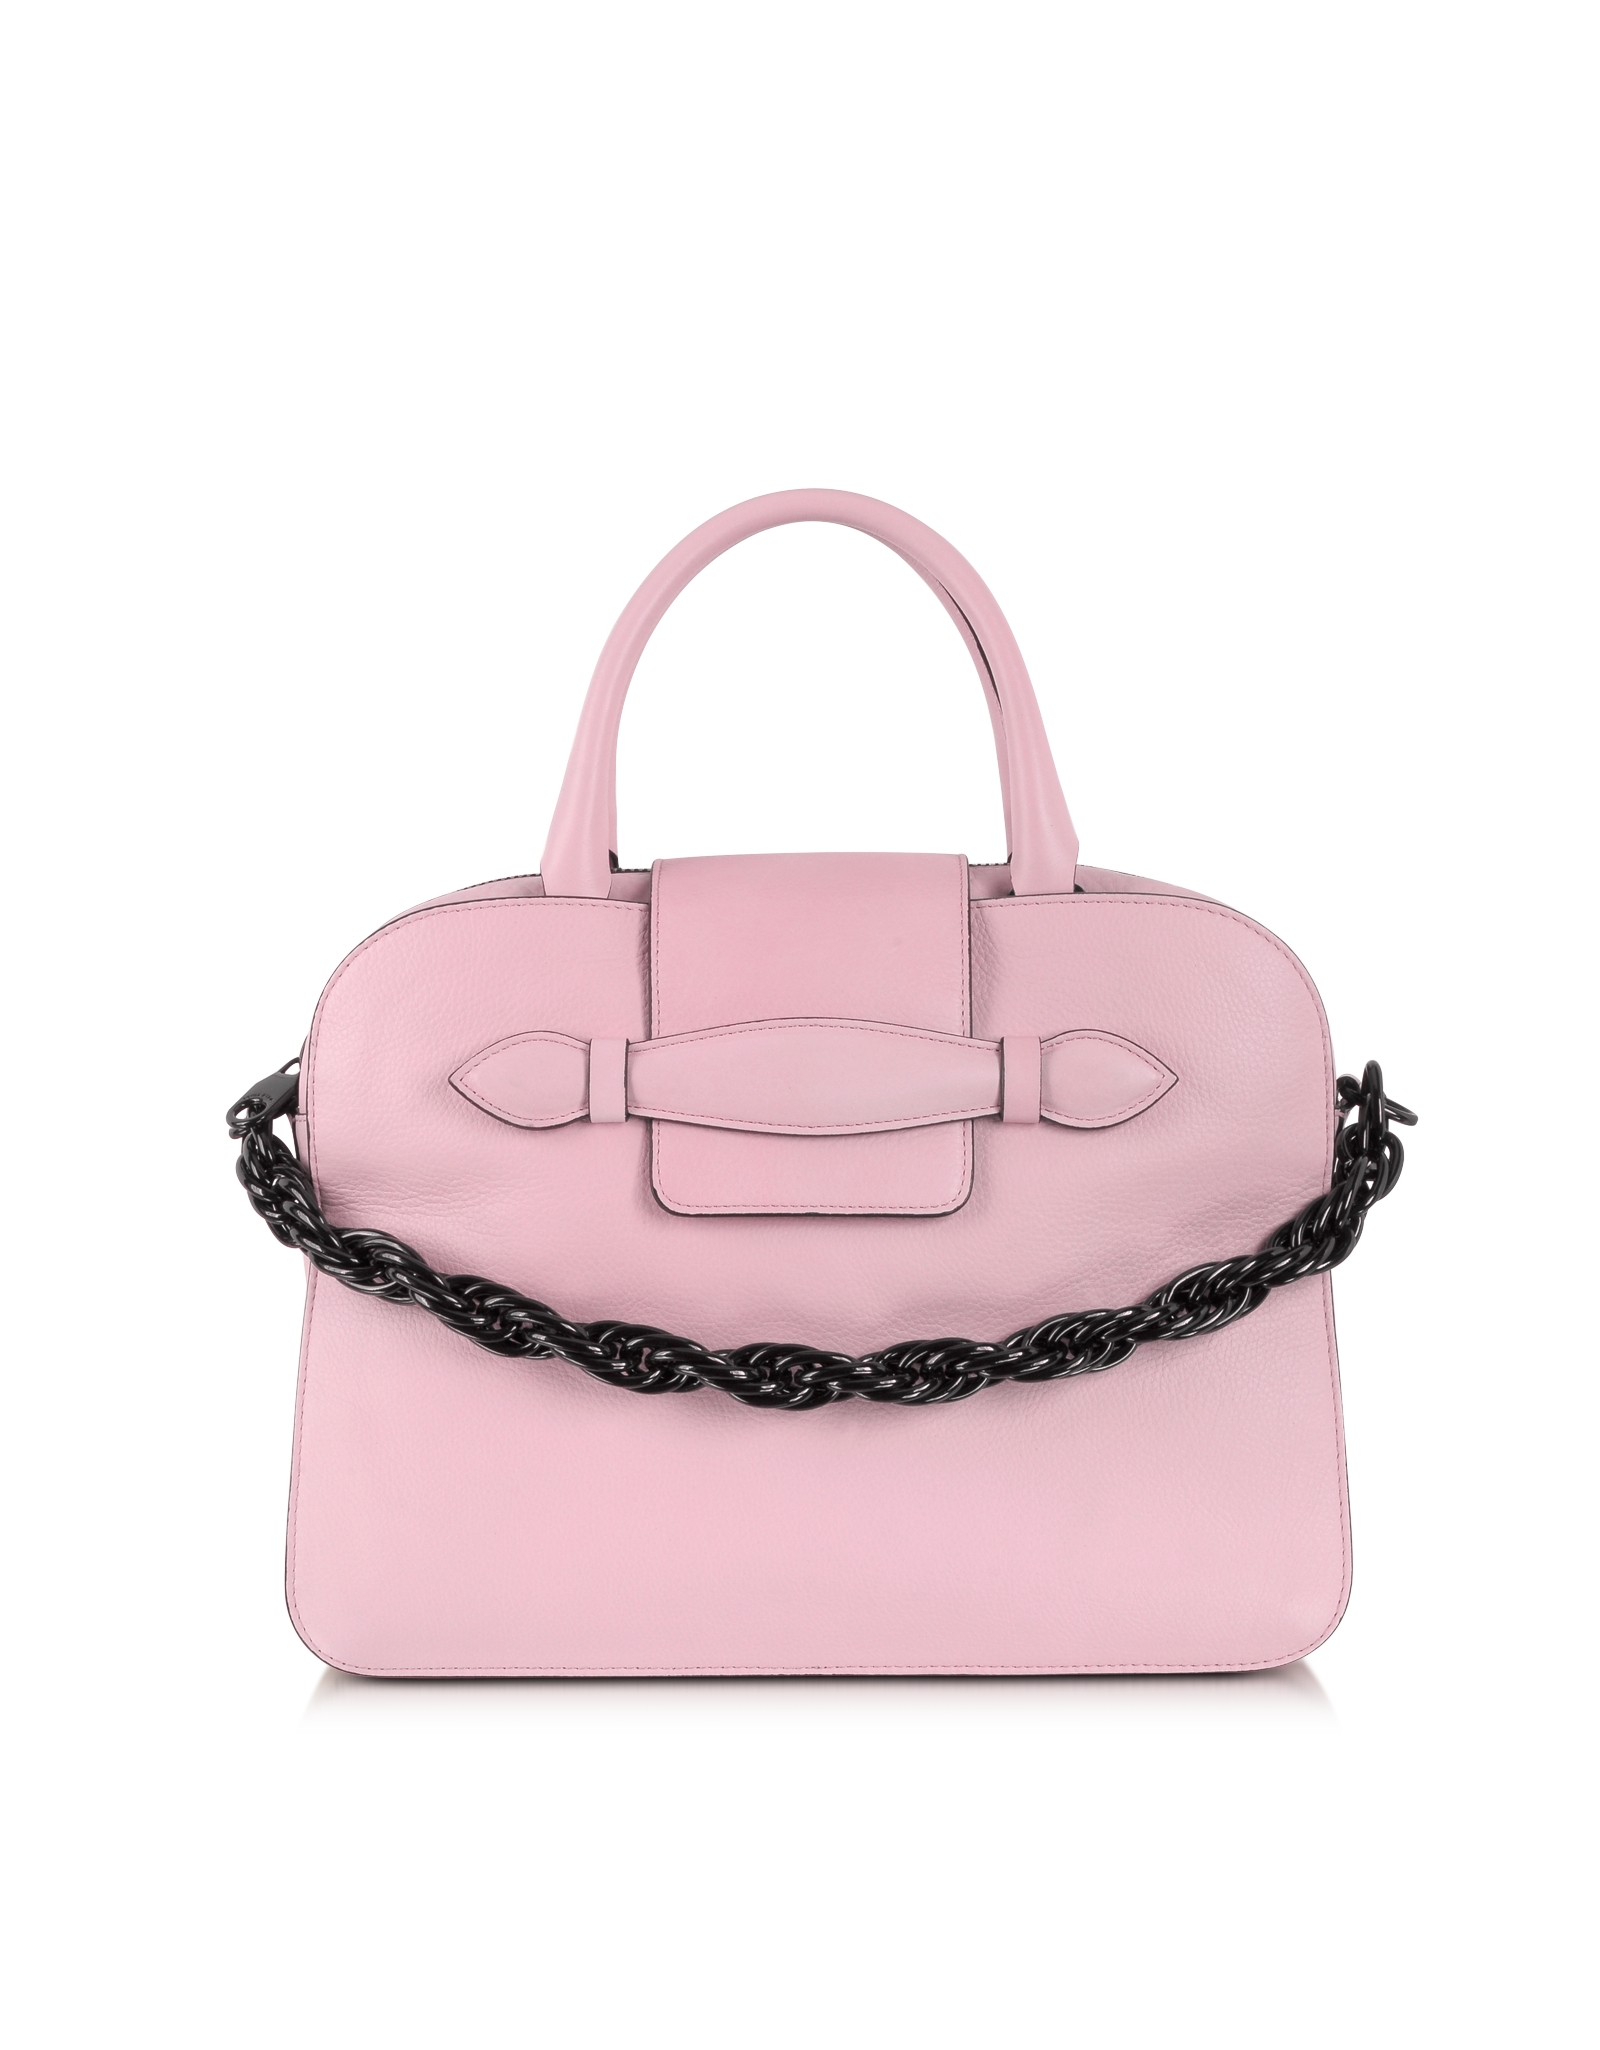 Sonia Rykiel Large Pink Leather Boston Bag in Pink | Lyst